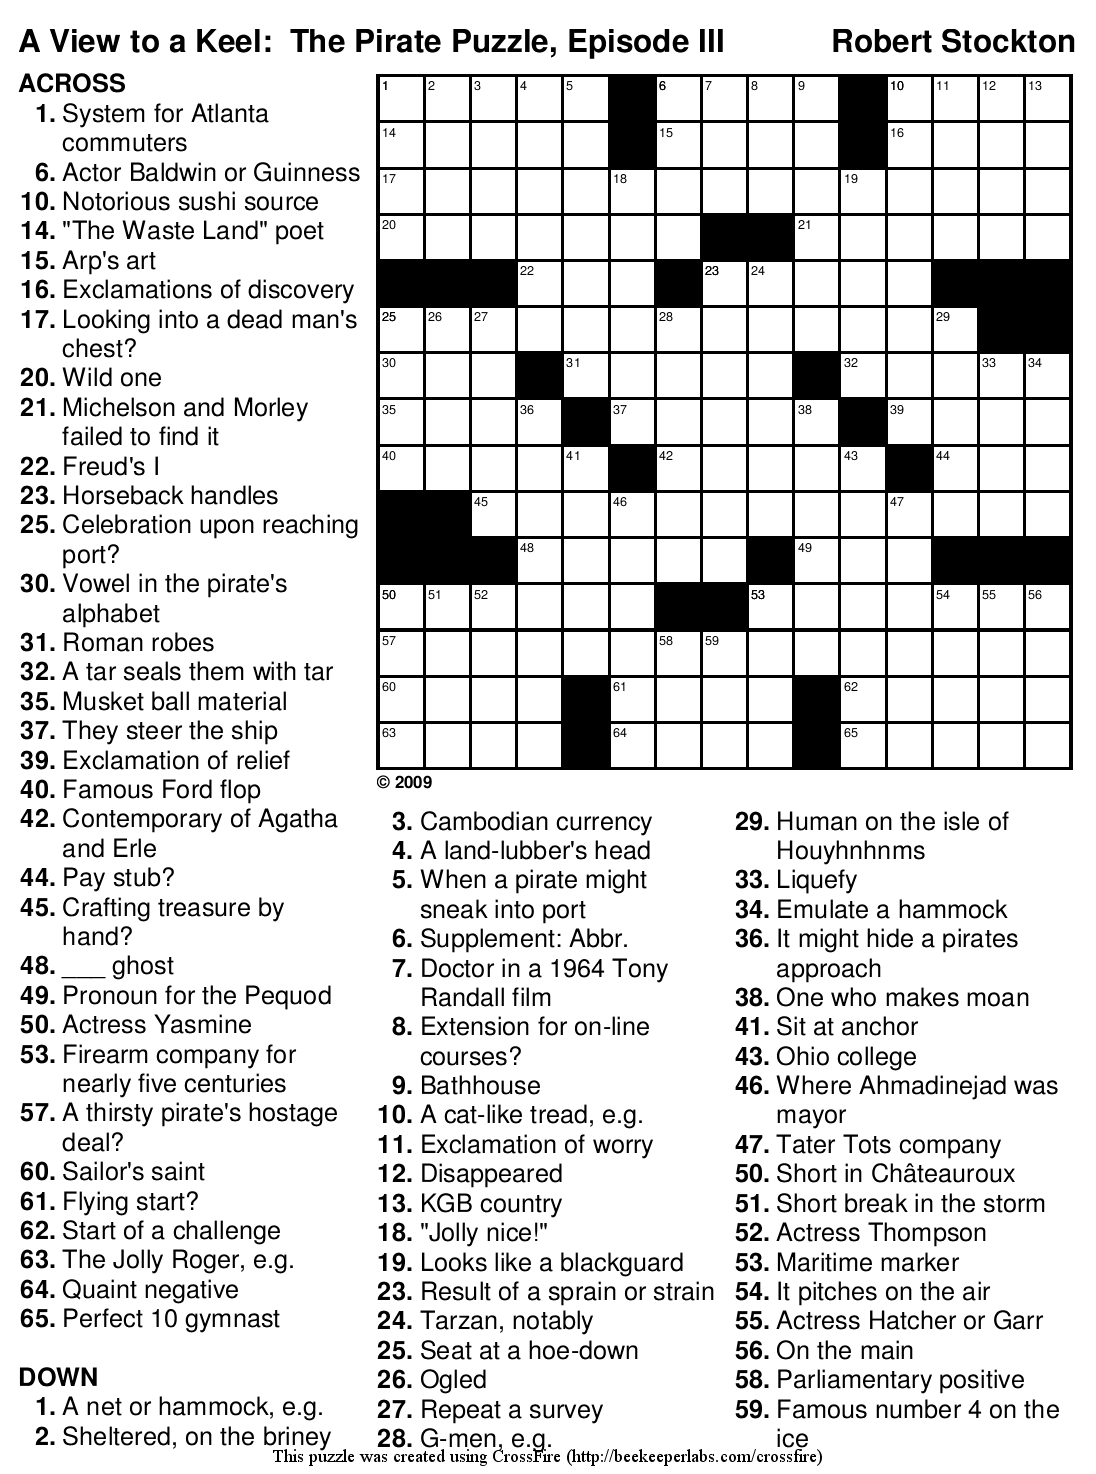 All About Free Daily Printable Crossword Puzzles Onlinecrosswordsnet - Printable Crosswords.net